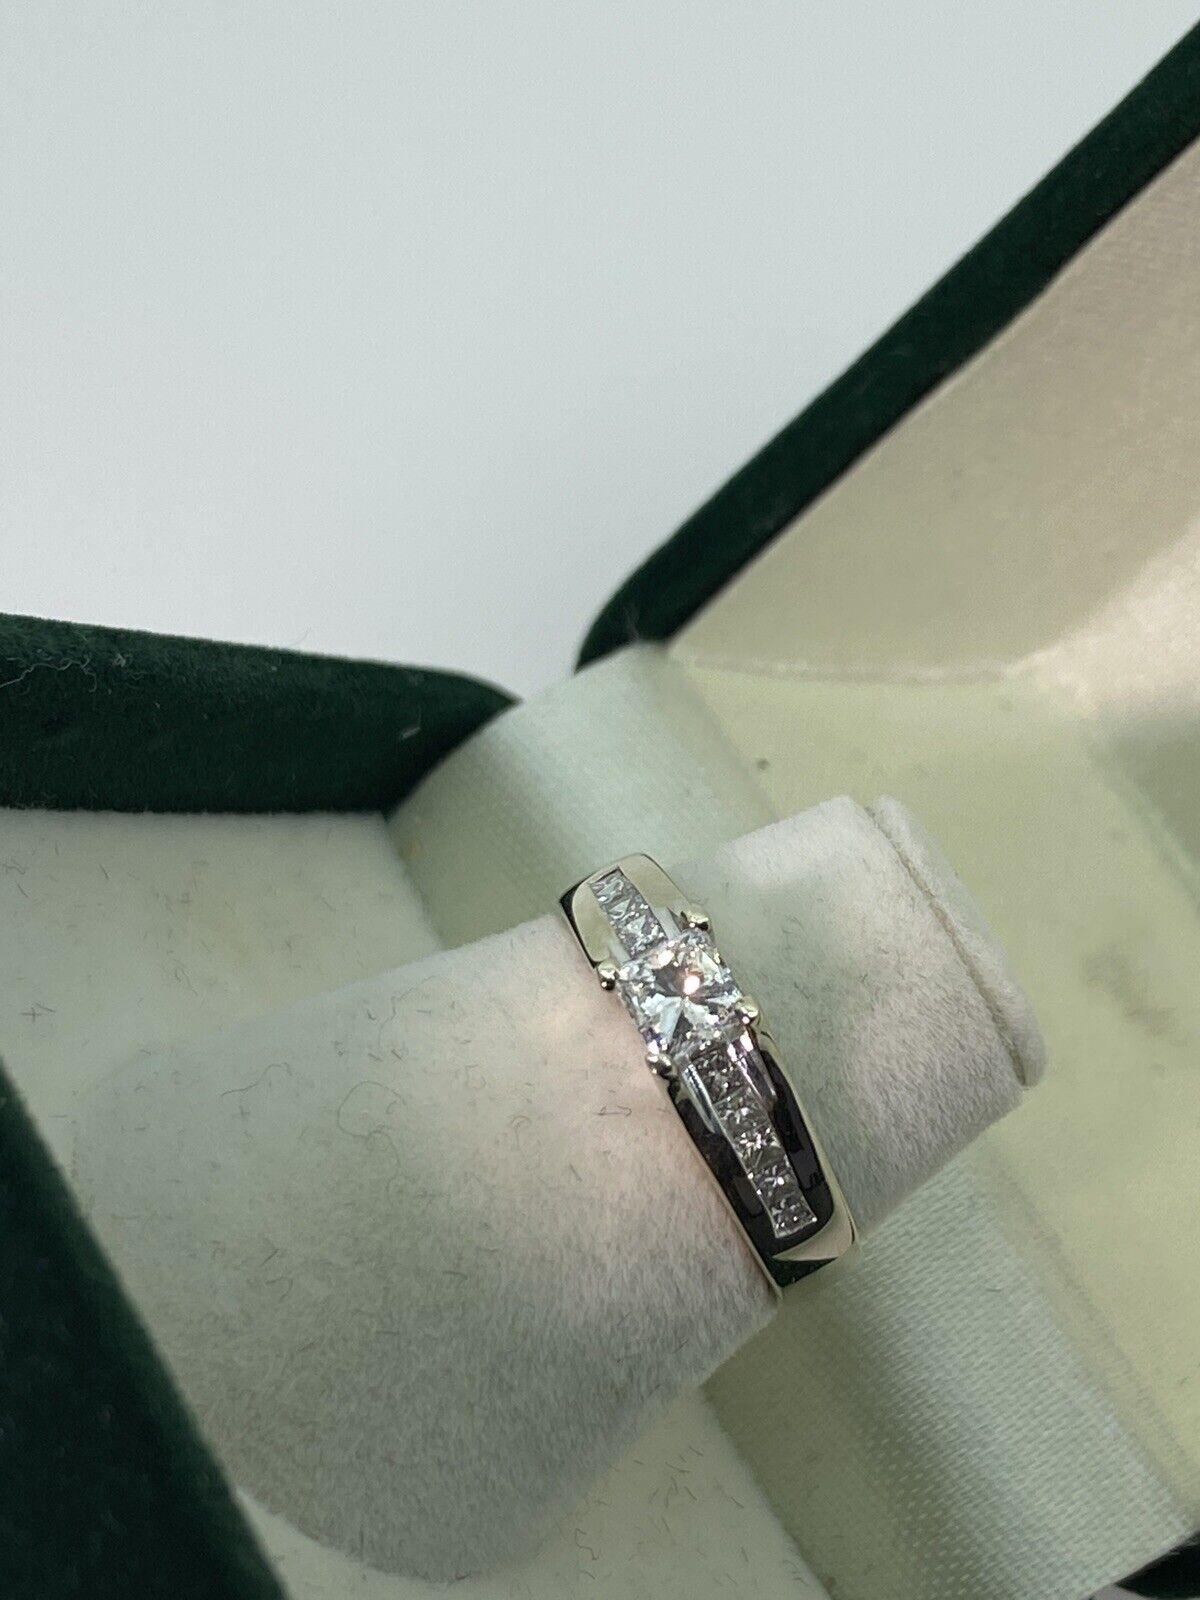 Women's 0.60ct Princess Cut Diamond (F/VS) Ring in 18K White Gold. Valued at $5250! For Sale